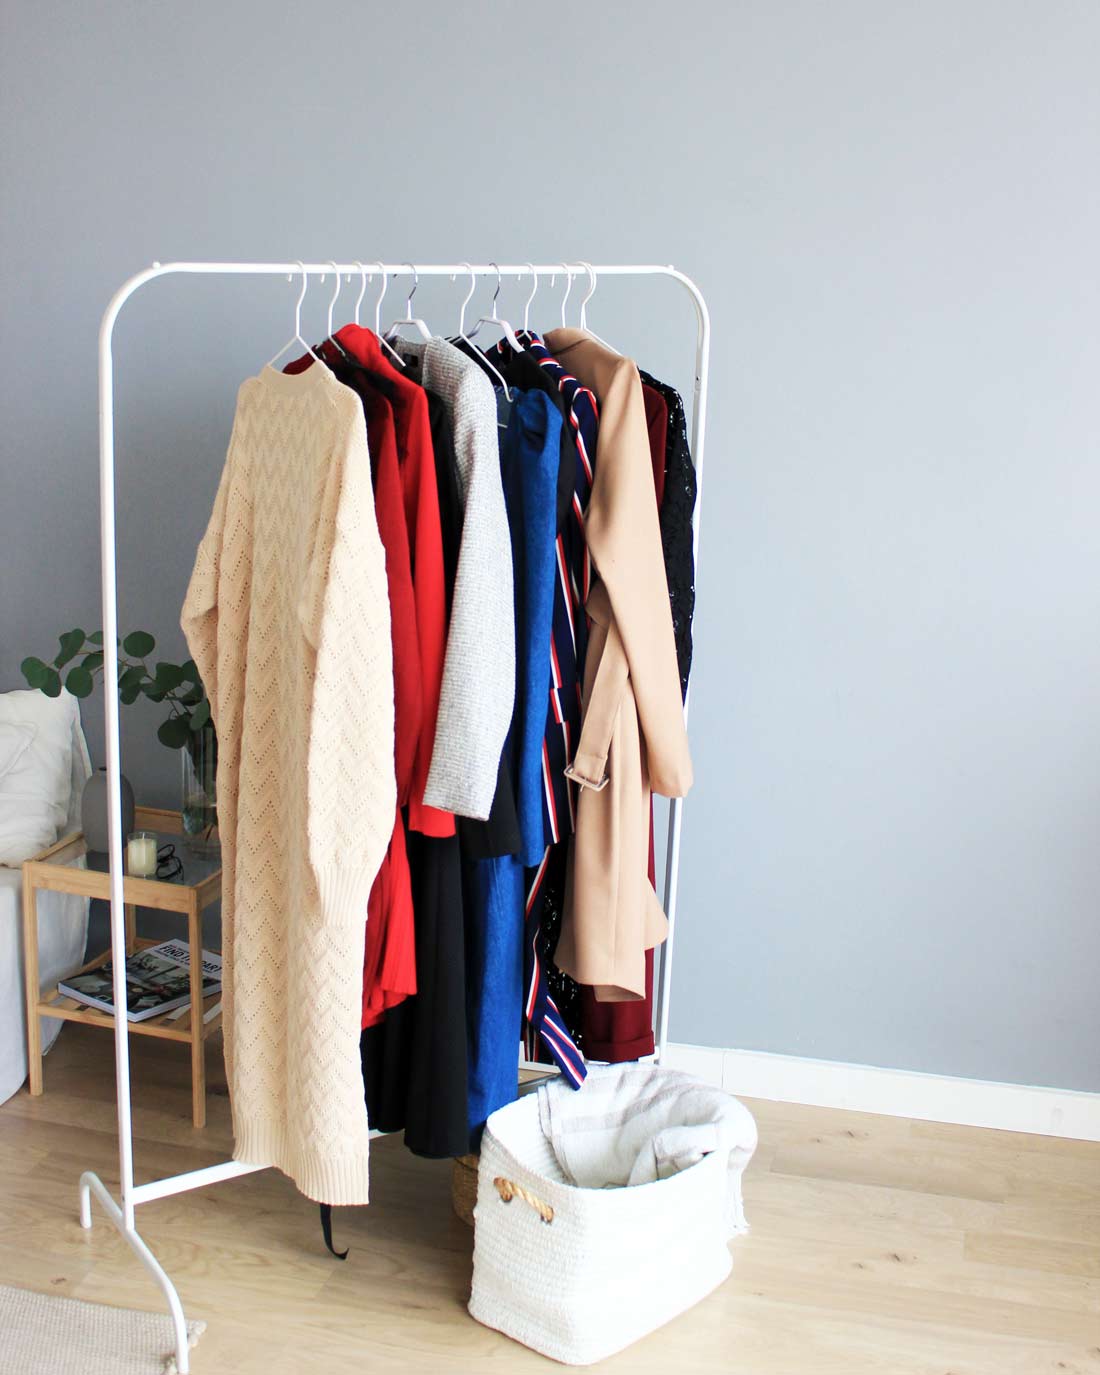 Minimalist curated clothes hanging on a rack for zero waste laundry article.